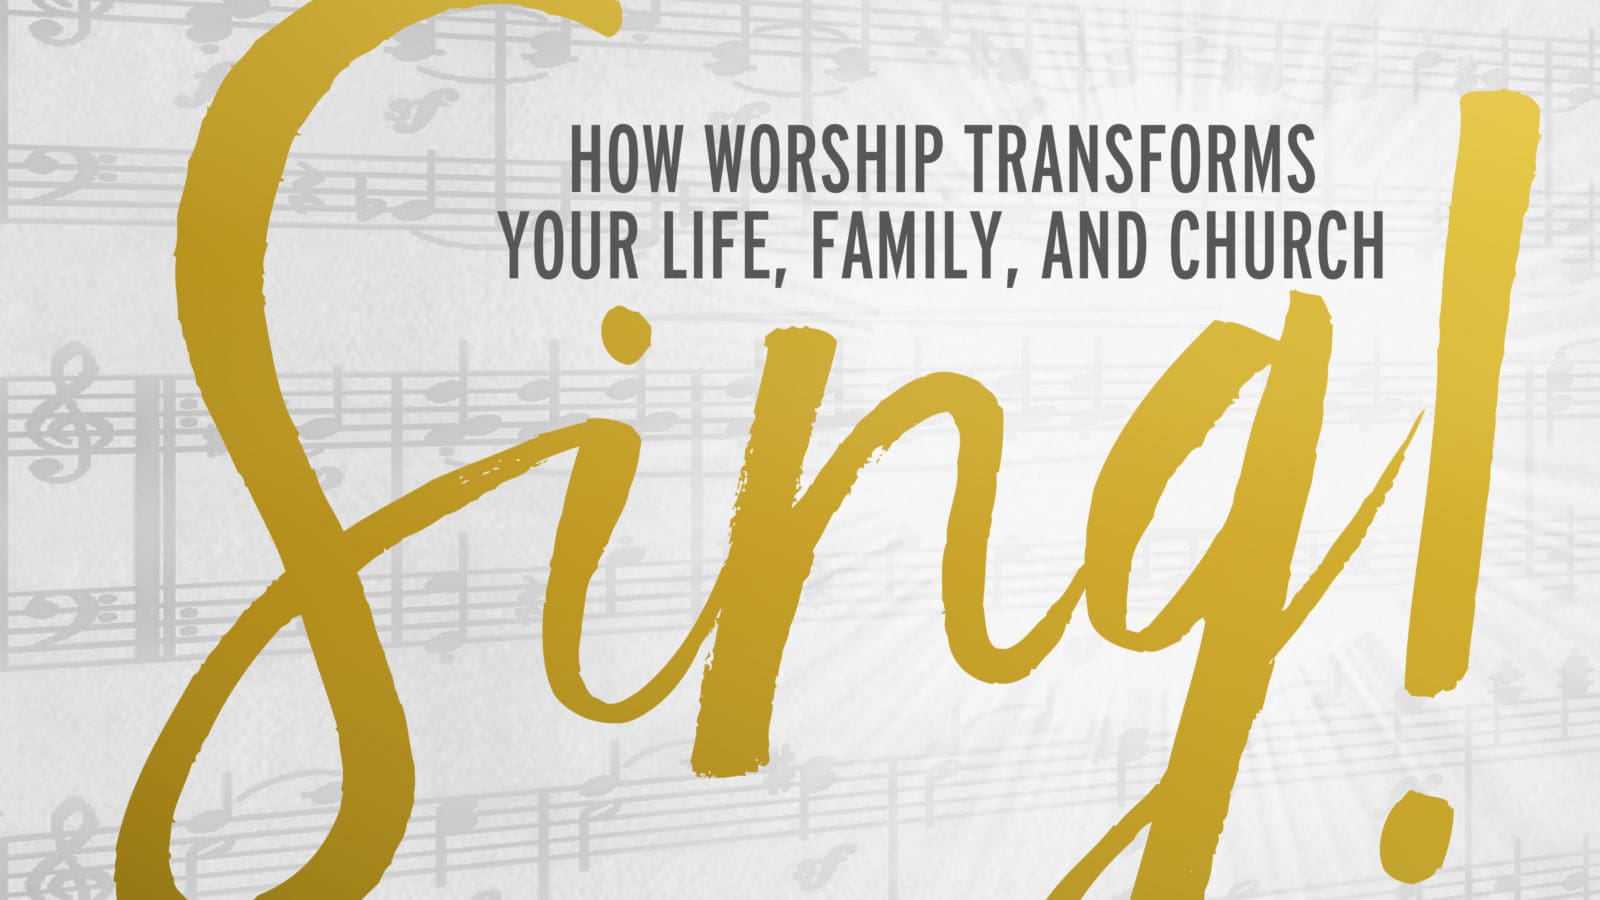 SING: With Your Family